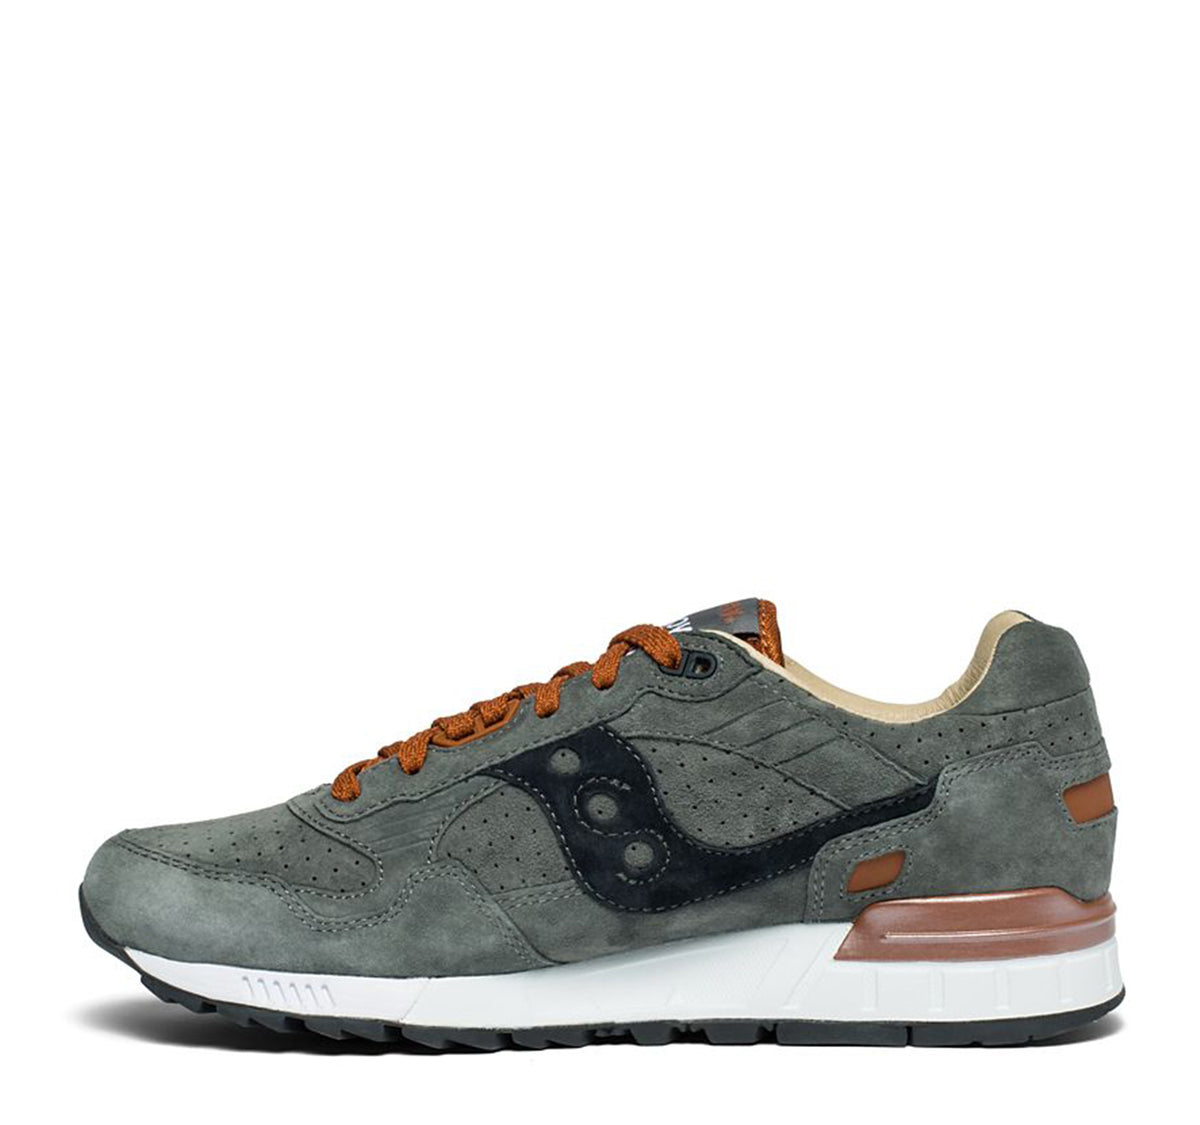 Saucony Shadow 5000 Weathered Men's Sneaker– On The EDGE